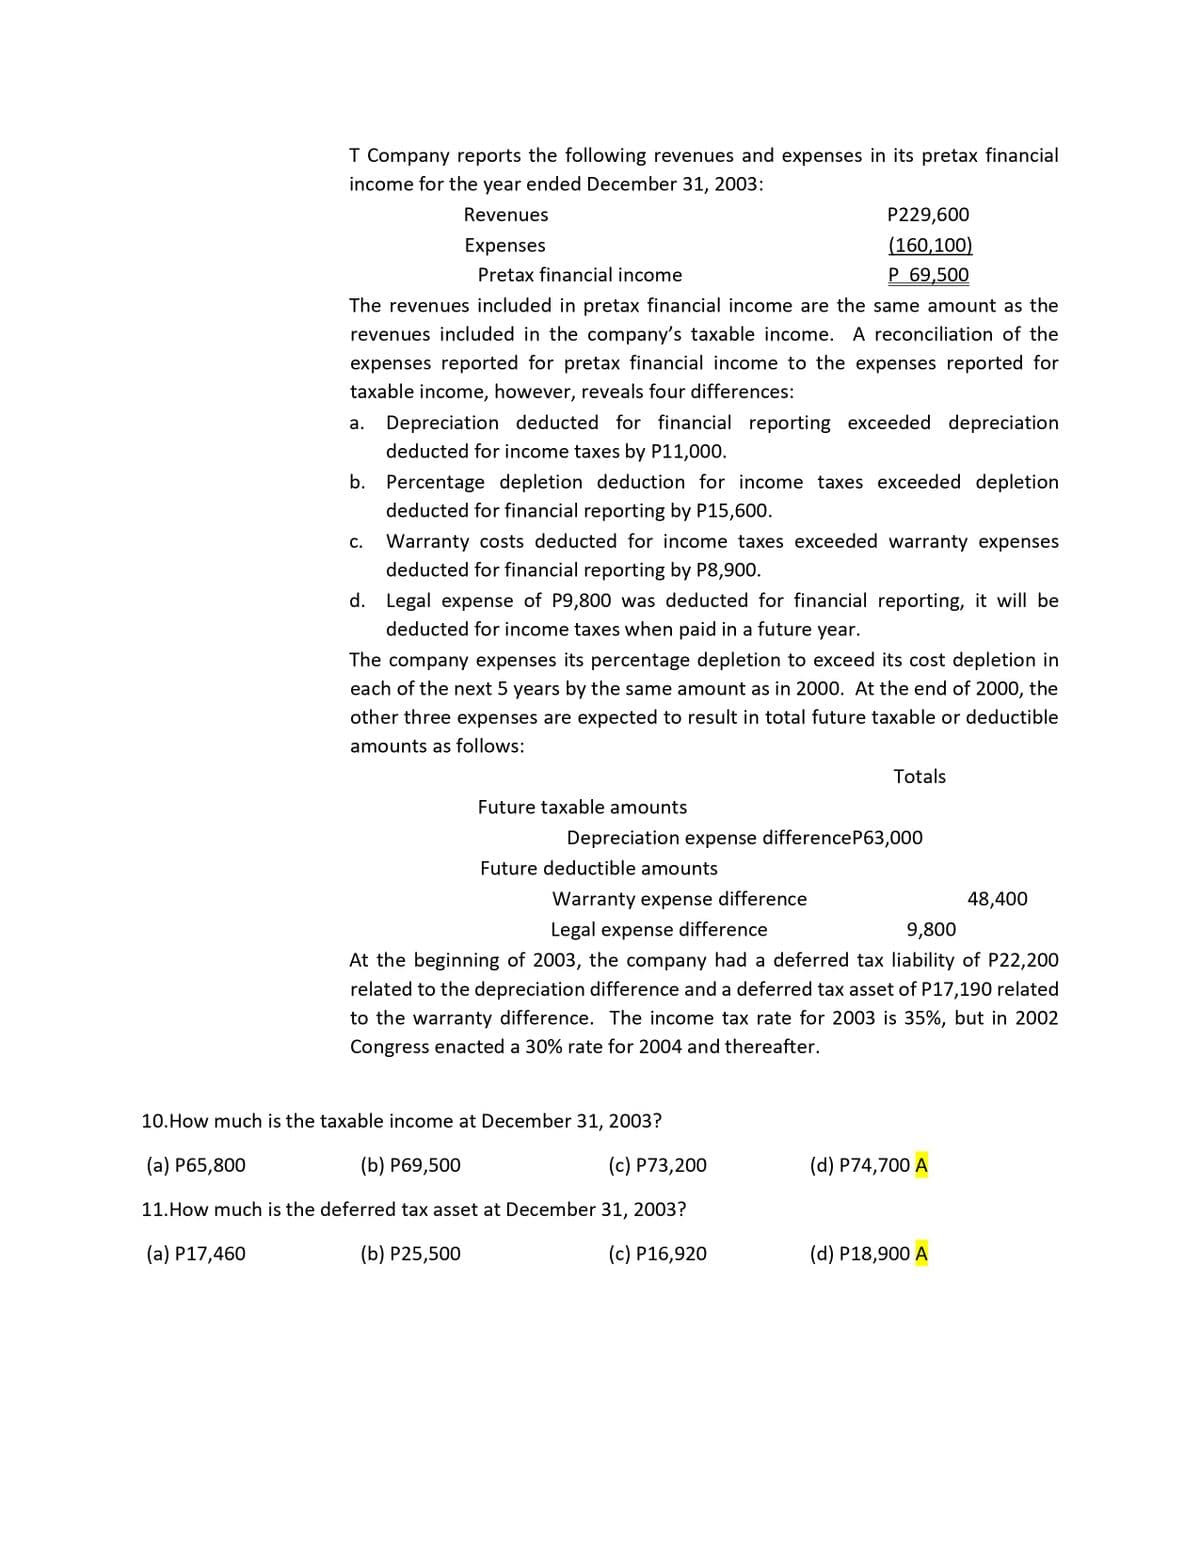 T Company reports the following revenues and expenses in its pretax financial
income for the year ended December 31, 2003:
Revenues
P229,600
(160,100)
P 69,500
Expenses
Pretax financial income
The revenues included in pretax financial income are the same amount as the
revenues included in the company's taxable income. A reconciliation of the
expenses reported for pretax financial income to the expenses reported for
taxable income, however, reveals four differences:
Depreciation deducted for financial reporting exceeded depreciation
deducted for income taxes by P11,000.
а.
b. Percentage depletion deduction for income taxes exceeded depletion
deducted for financial reporting by P15,600.
Warranty costs deducted for income taxes exceeded warranty expenses
deducted for financial reporting by P8,900.
С.
d. Legal expense of P9,800 was deducted for financial reporting, it will be
deducted for income taxes when paid in a future year.
The company expenses its percentage depletion to exceed its cost depletion in
each of the next 5 years by the same amount as in 2000. At the end of 2000, the
other three expenses are expected to result in total future taxable or deductible
amounts as follows:
Totals
Future taxable amounts
Depreciation expense differenceP63,000
Future deductible amounts
Warranty expense difference
48,400
Legal expense difference
9,800
At the beginning of 2003, the company had a deferred tax liability of P22,200
related to the depreciation difference and a deferred tax asset of P17,190 related
to the warranty difference. The income tax rate for 2003 is 35%, but in 2002
Congress enacted a 30% rate for 2004 and thereafter.
10.How much is the taxable income at December 31, 2003?
(a) P65,800
(b) P69,500
(c) P73,200
(d) P74,700 A
11.How much is the deferred tax asset at December 31, 2003?
(a) P17,460
(b) P25,500
(c) P16,920
(d) P18,900 A
